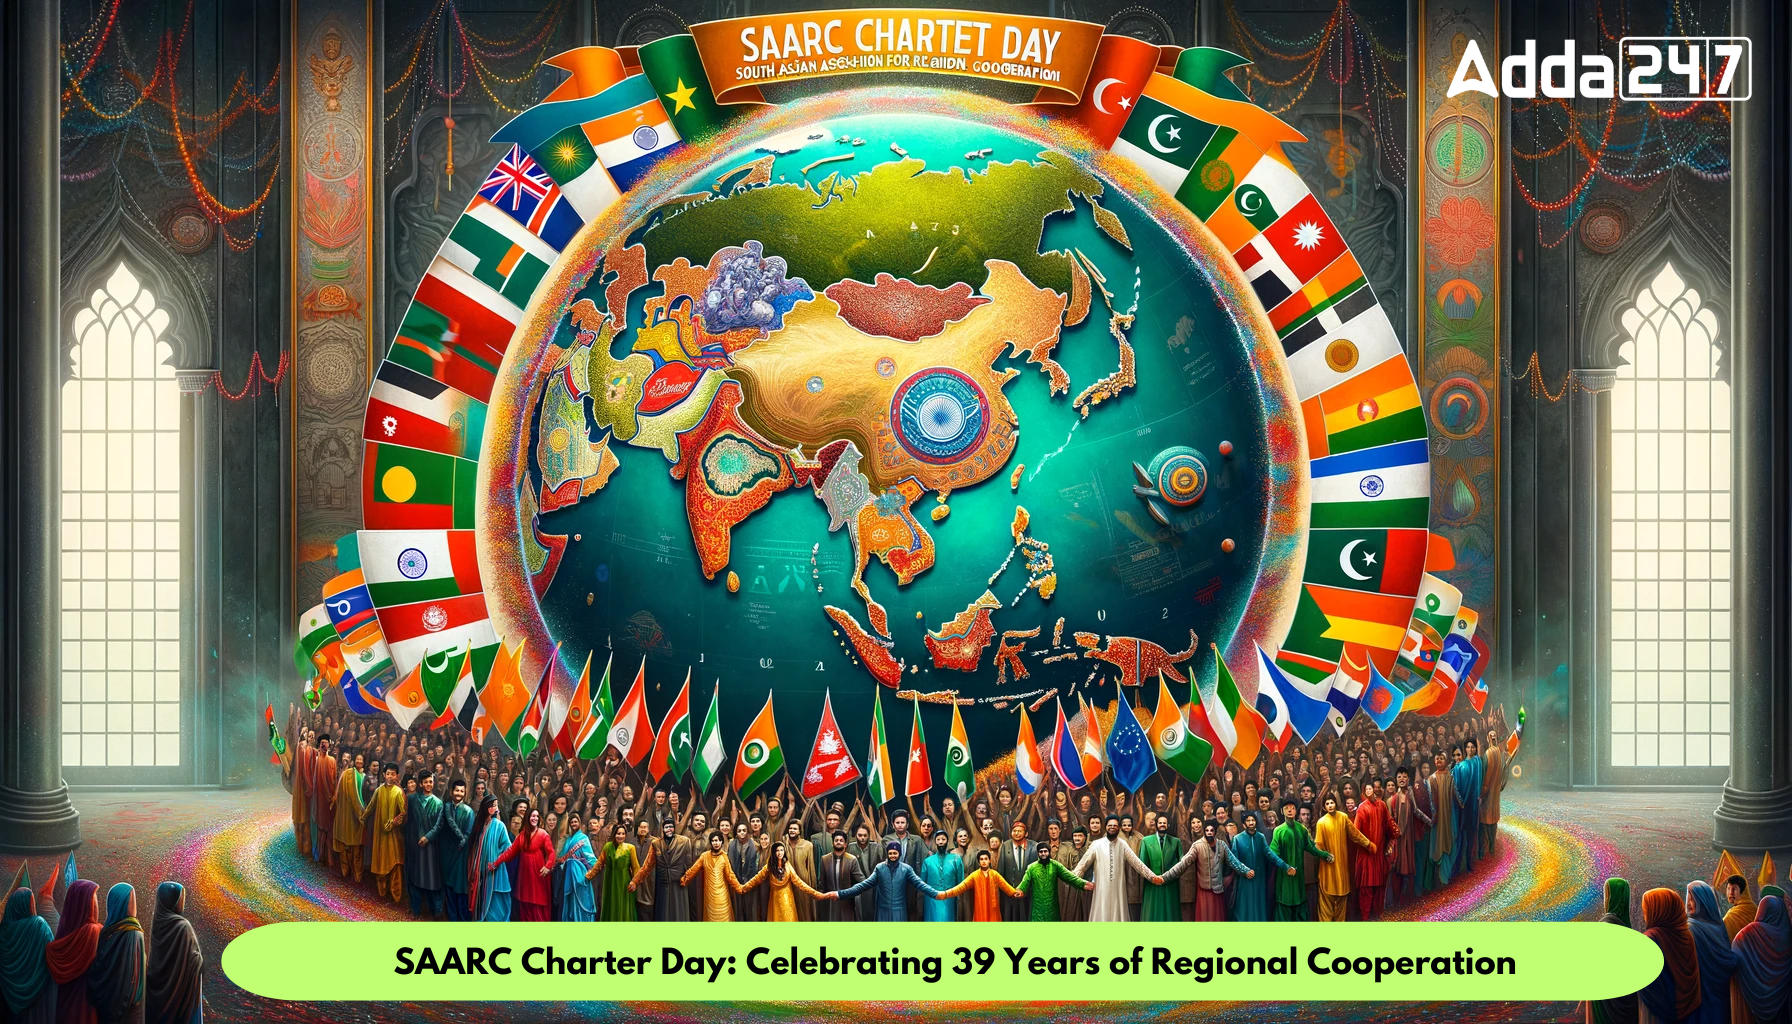 SAARC Charter Day: Celebrating 39 Years of Regional Cooperation